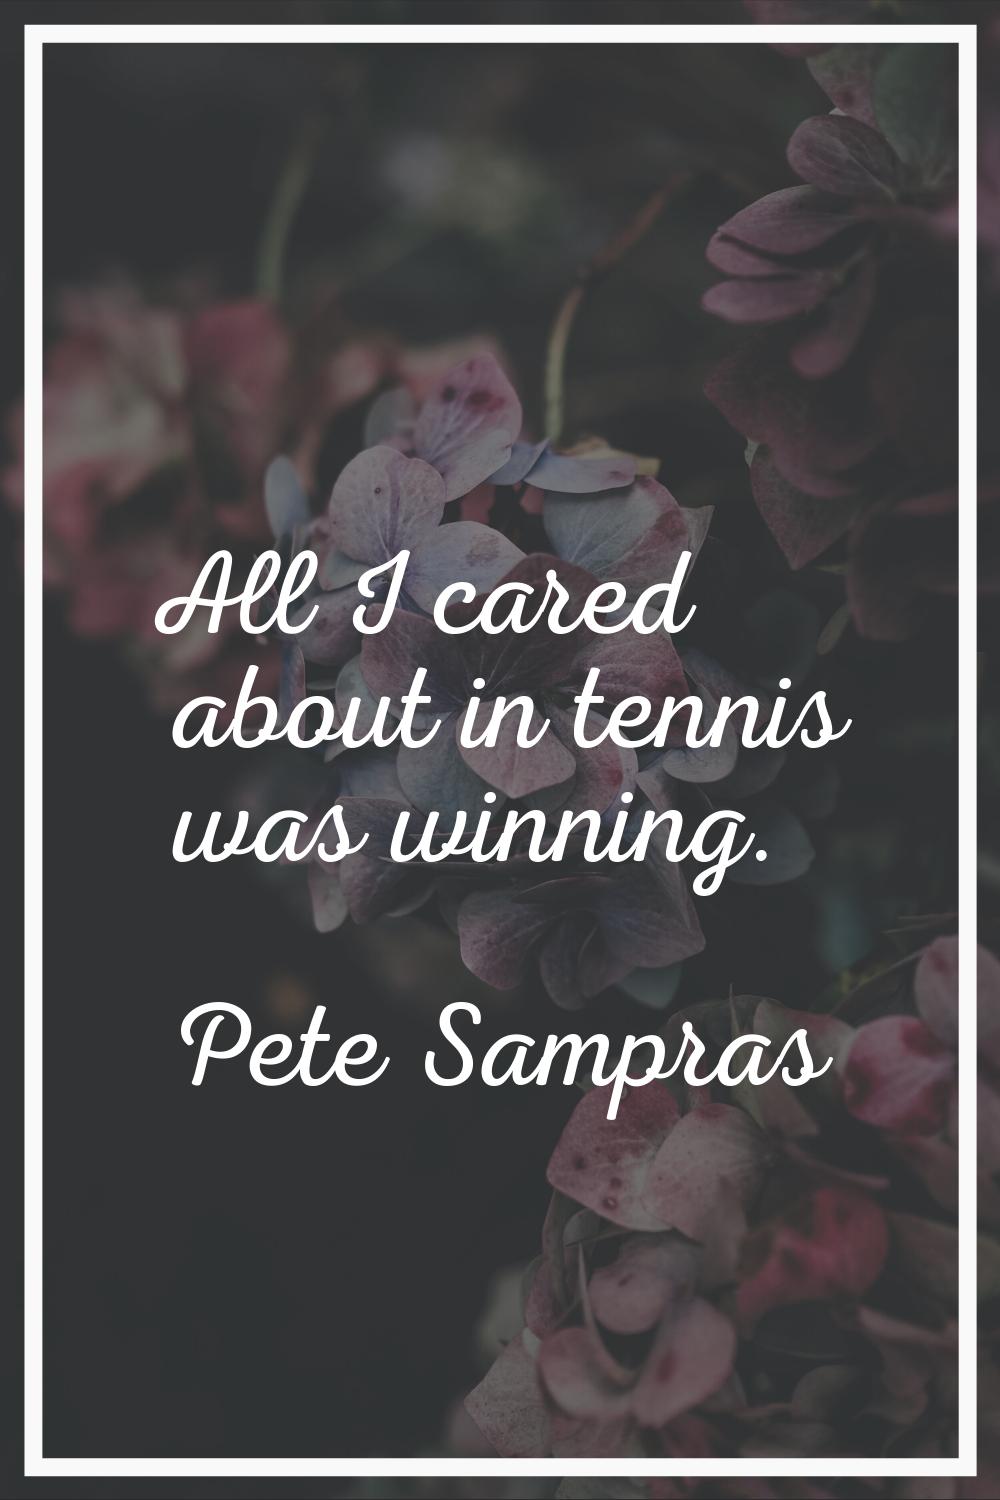 All I cared about in tennis was winning.